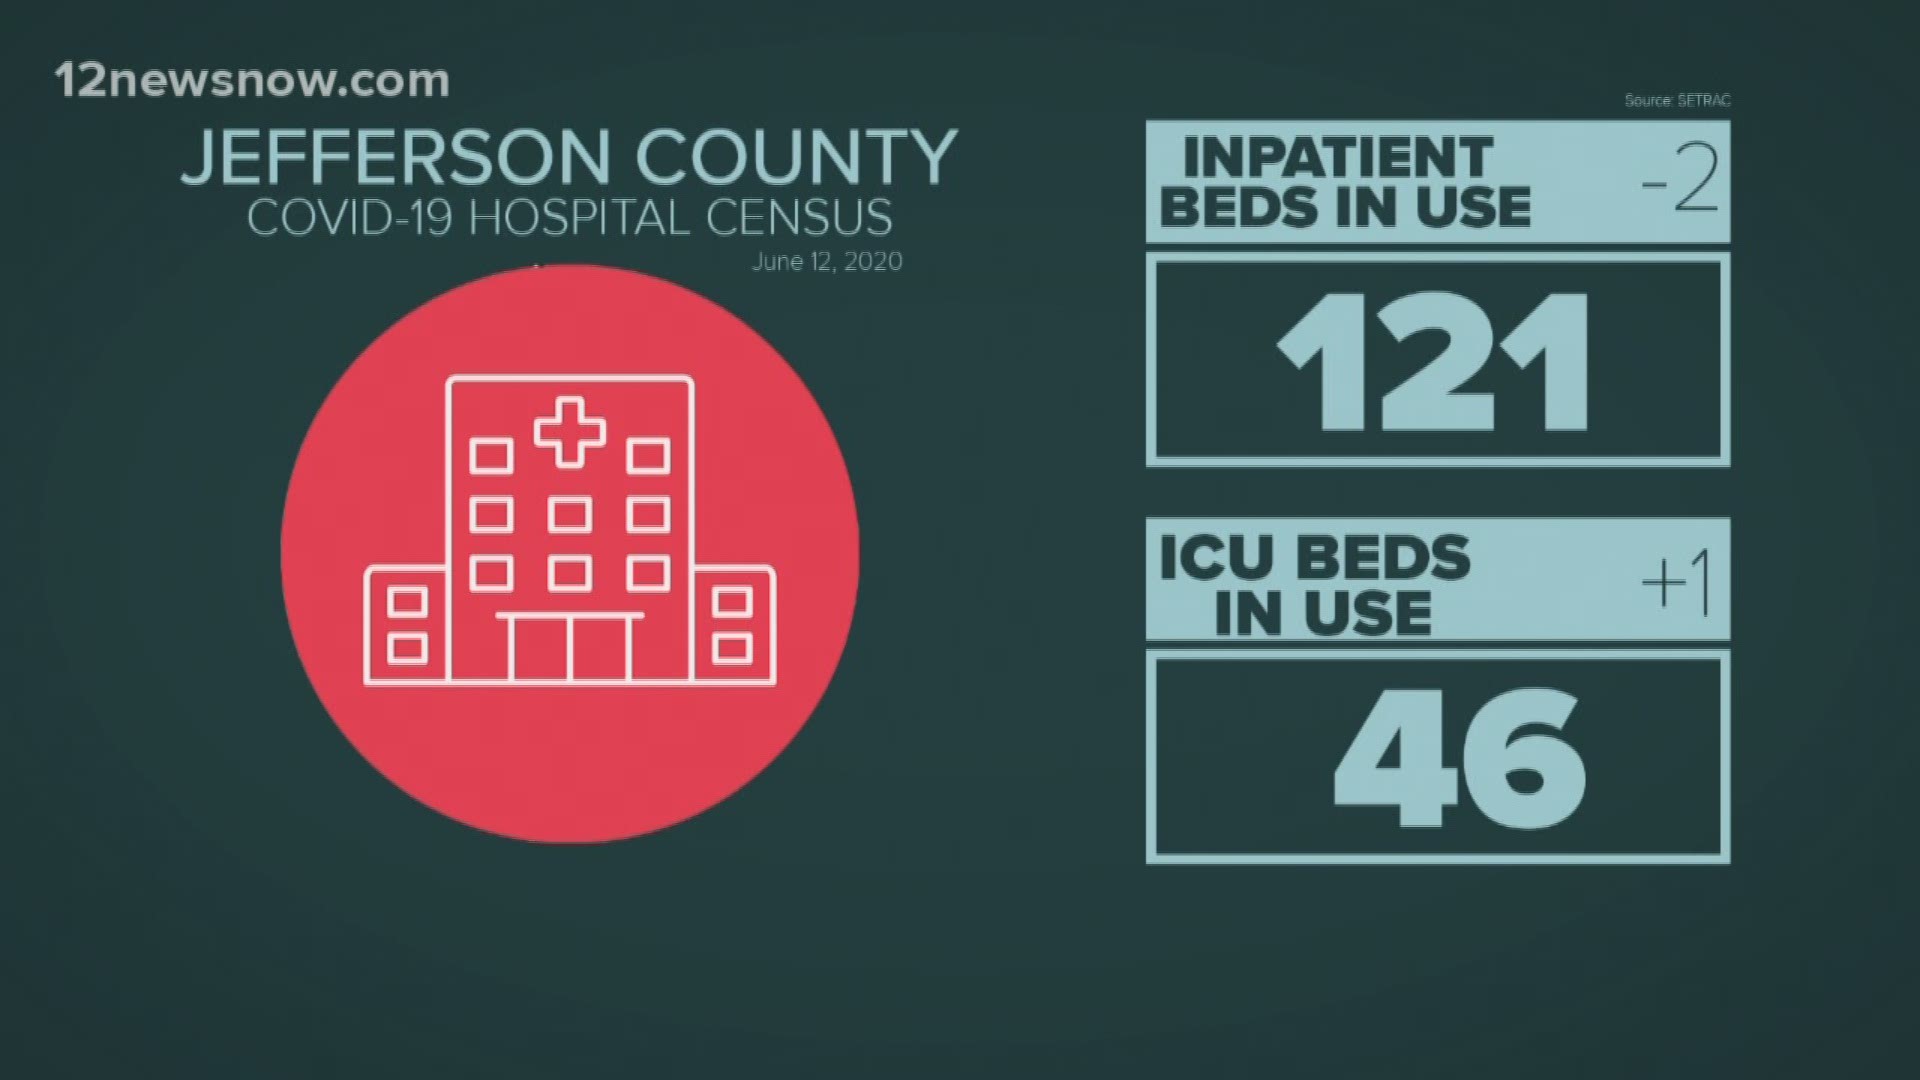 Jefferson County's hospitalization number remained steady on Sunday